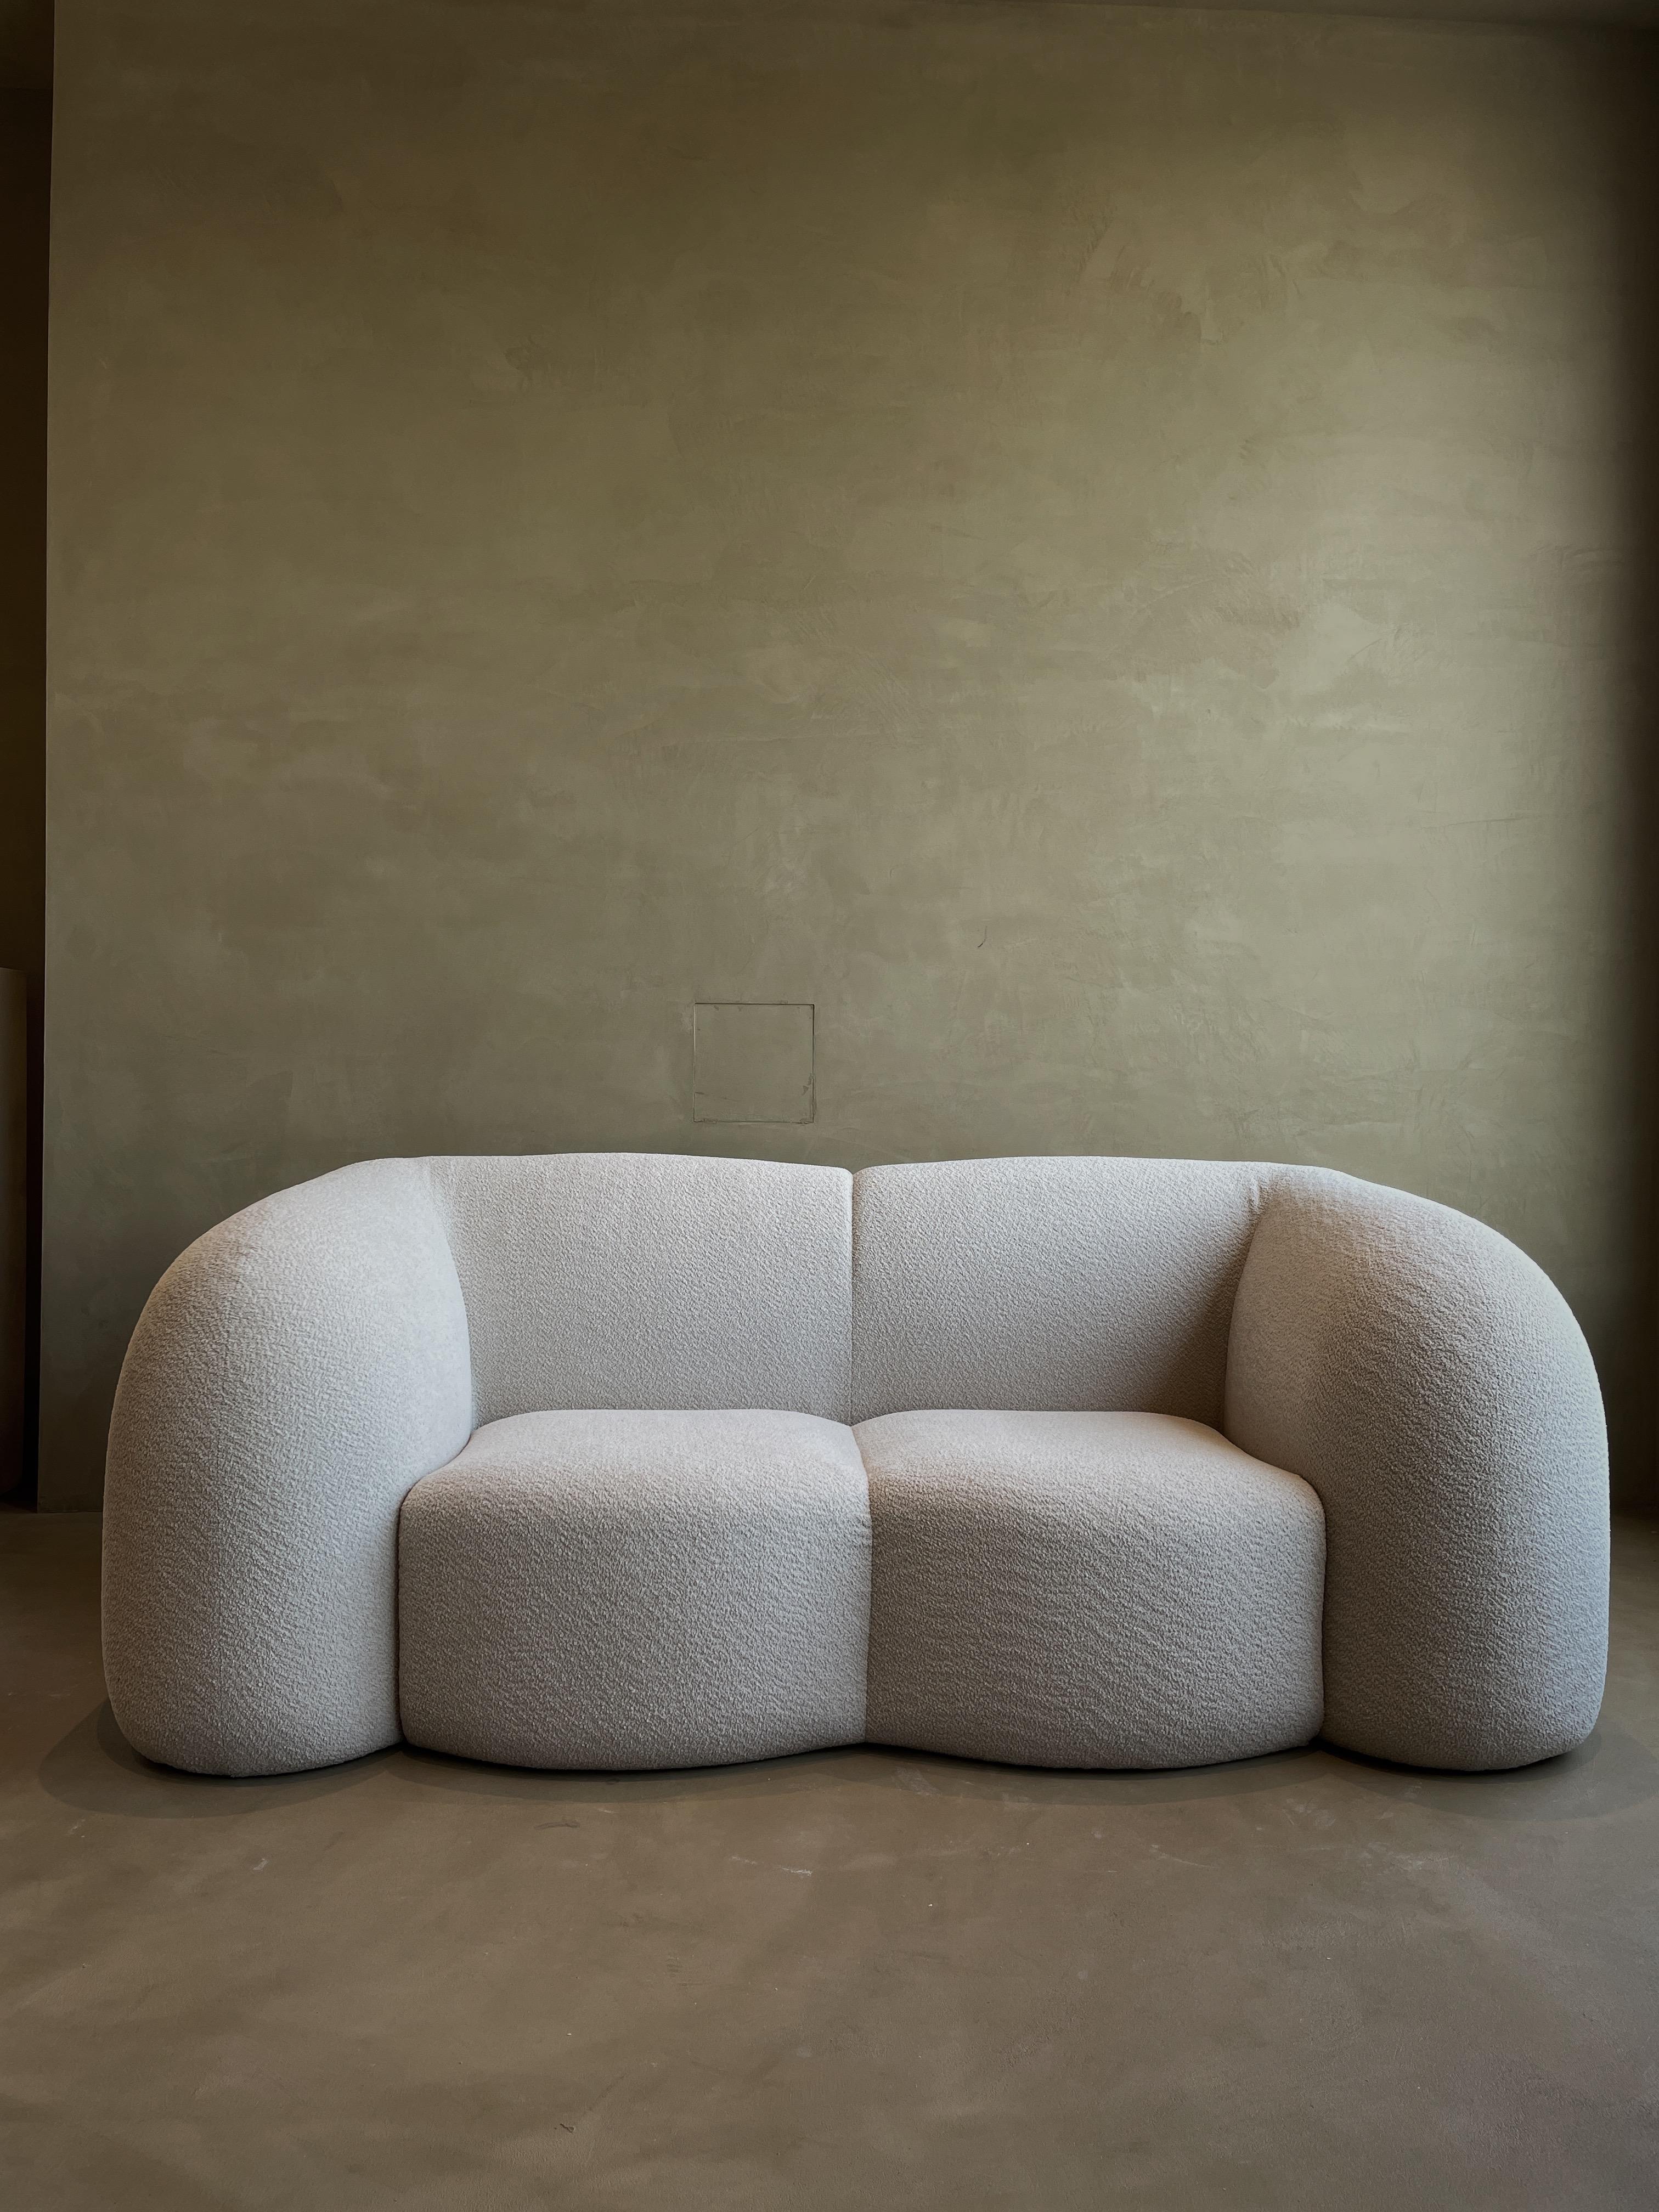 Marshmallow sofa by Karstudio
Dimensions: W 213.5 x D 103 x H 80 cm
Materials: MDF frame, fabric
Colour can be customized. 

Kar, is the root of Sanskrit Karma, meaning karmic repetition. We seek the cause and effect in aesthetics, inspired